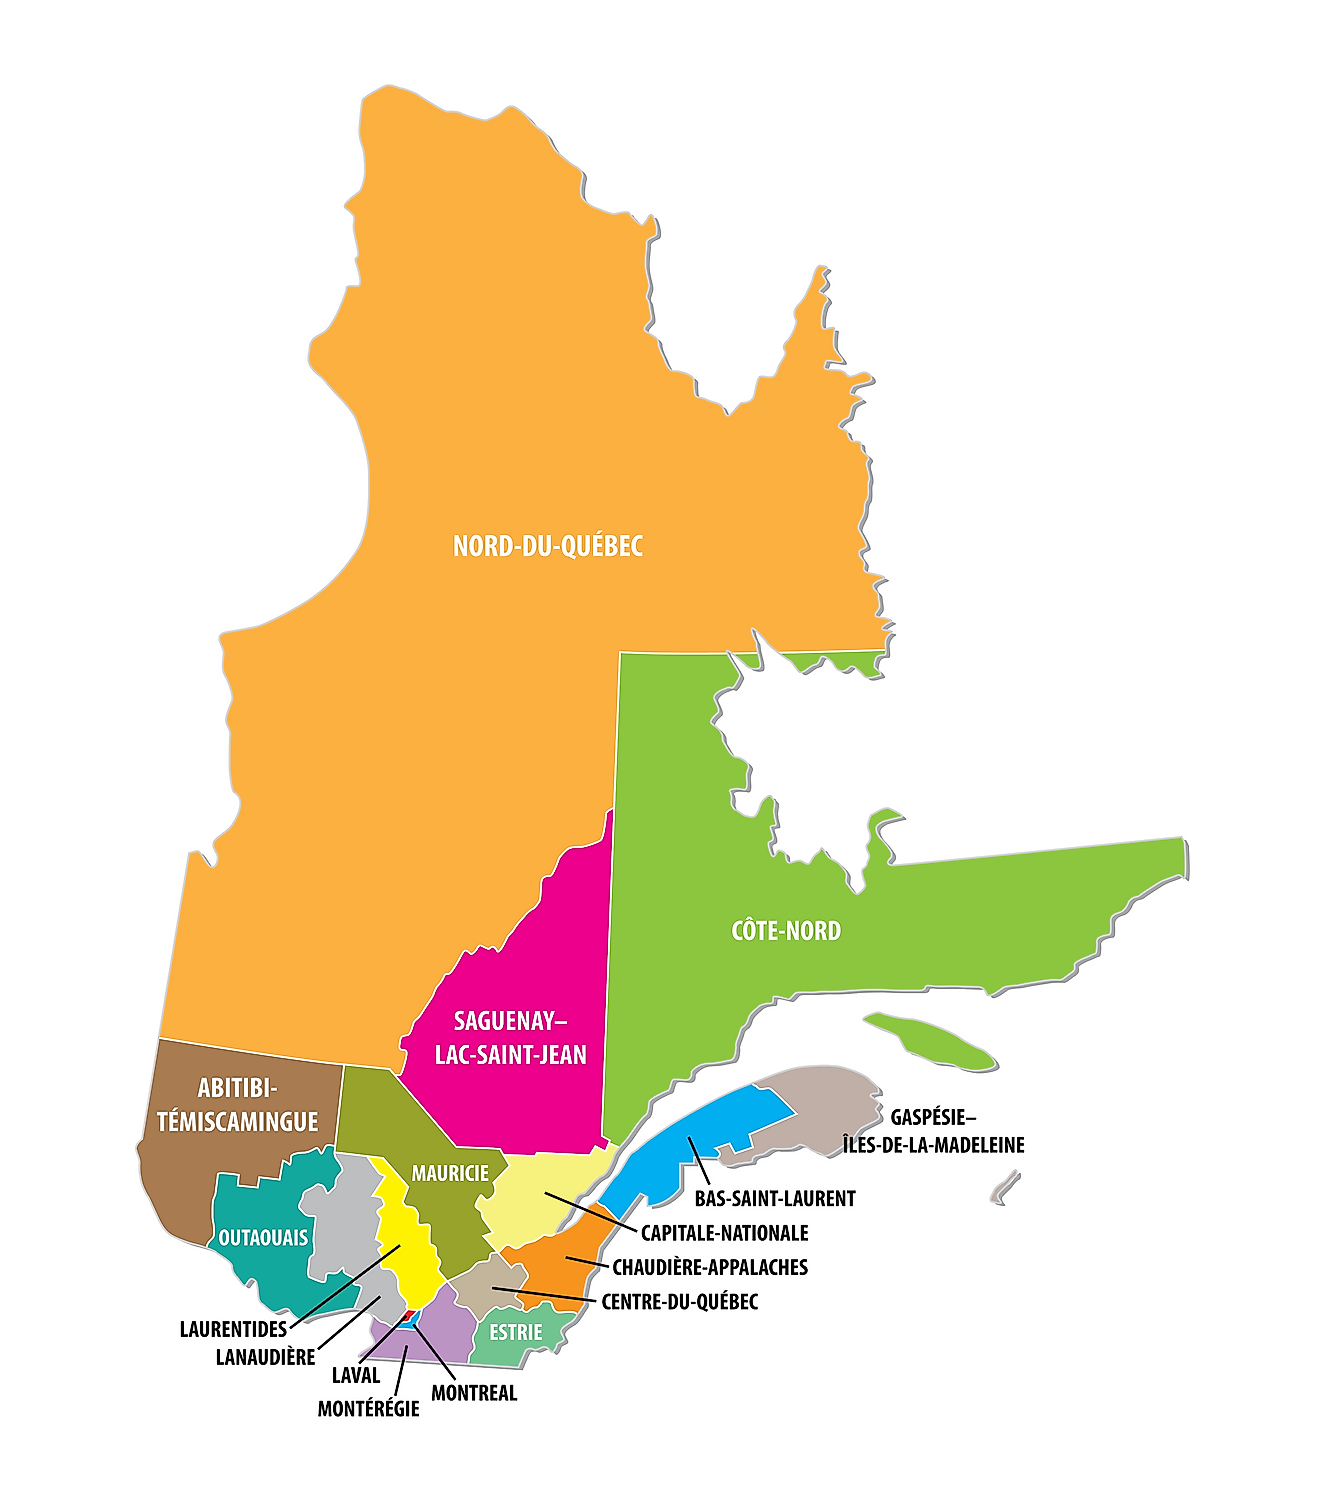 Administrative Map of Quebec showing its various administrative divisions and its capital city - Quebec City